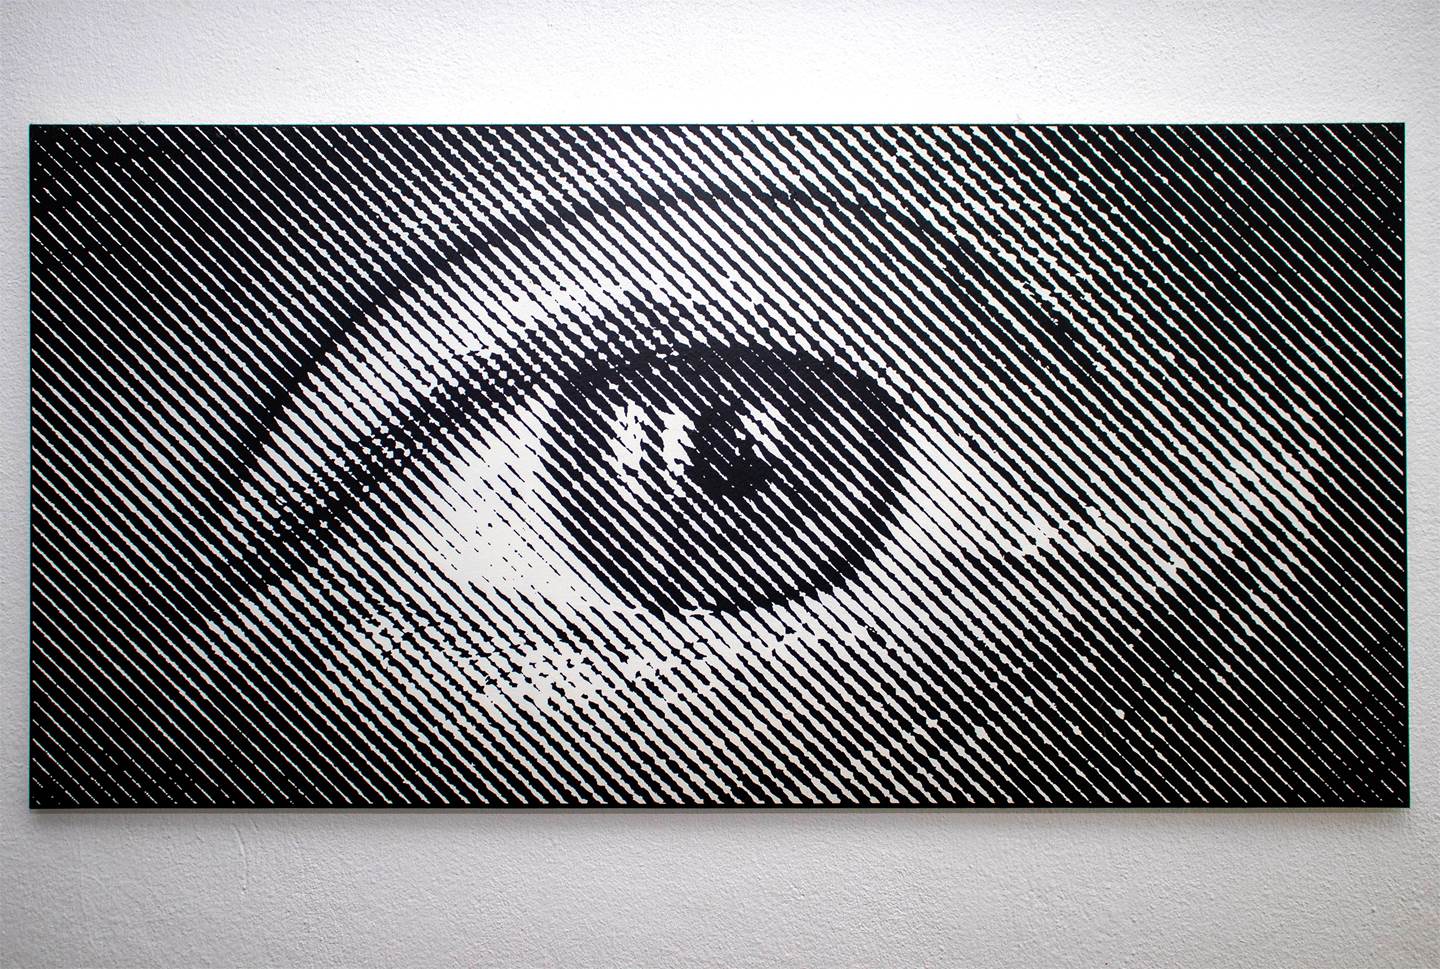 Her Eye , original   Drawing and Illustration by André Freire-Rocha